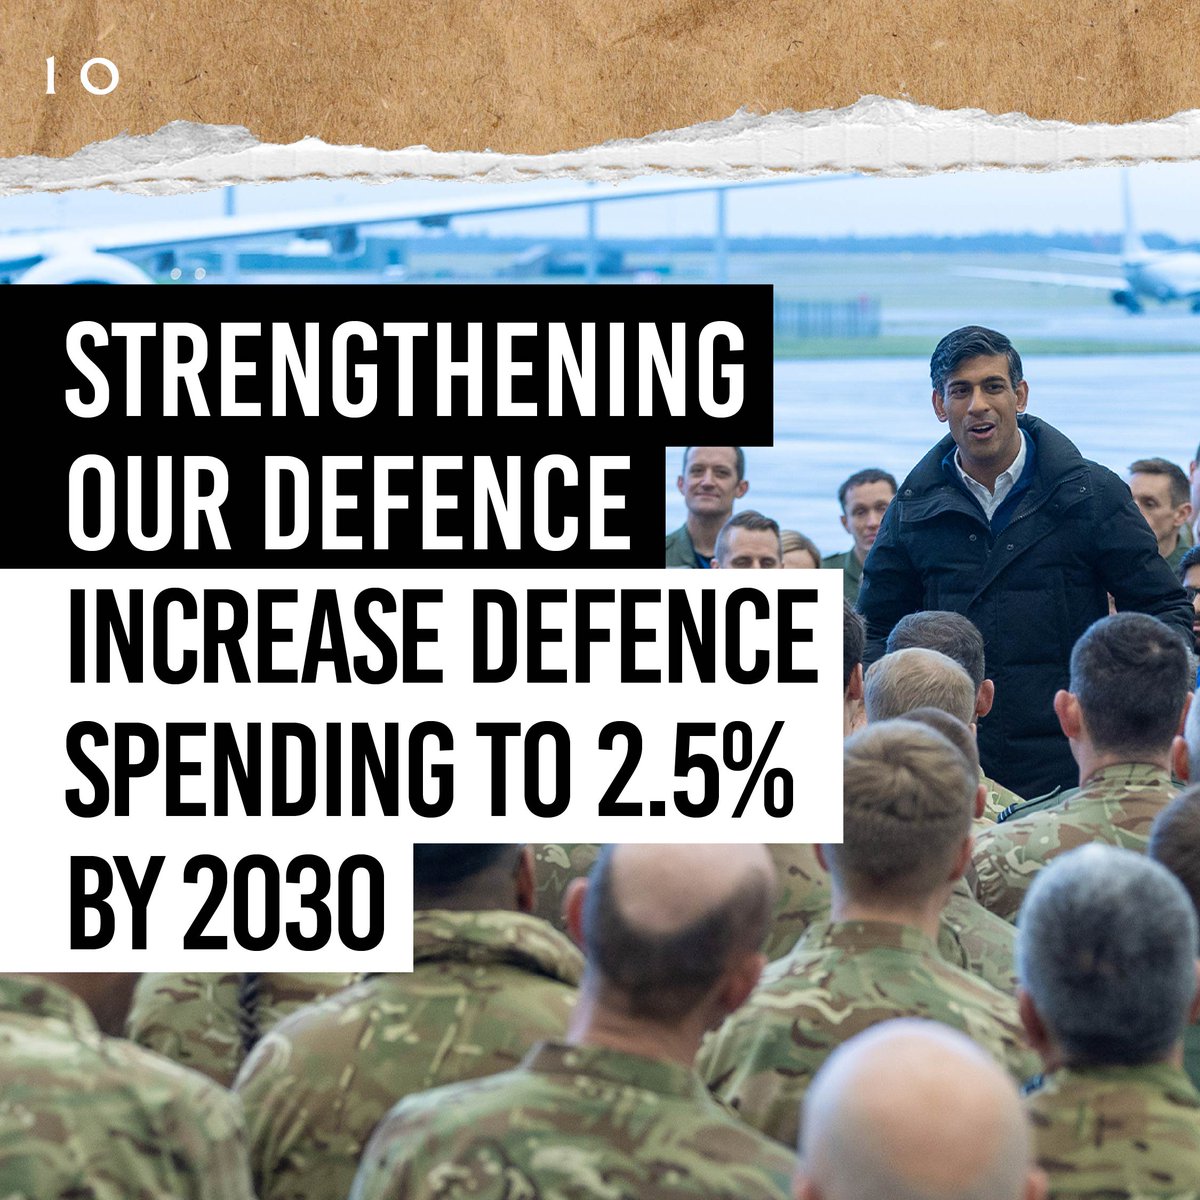 Today is a landmark moment in the defence of the United Kingdom. We’ll spend an extra £75 billion in defence over the next six years. ▪️ Protecting our security and prosperity ▪️ Backing Ukraine for the long-term ▪️ Leading the way in European security